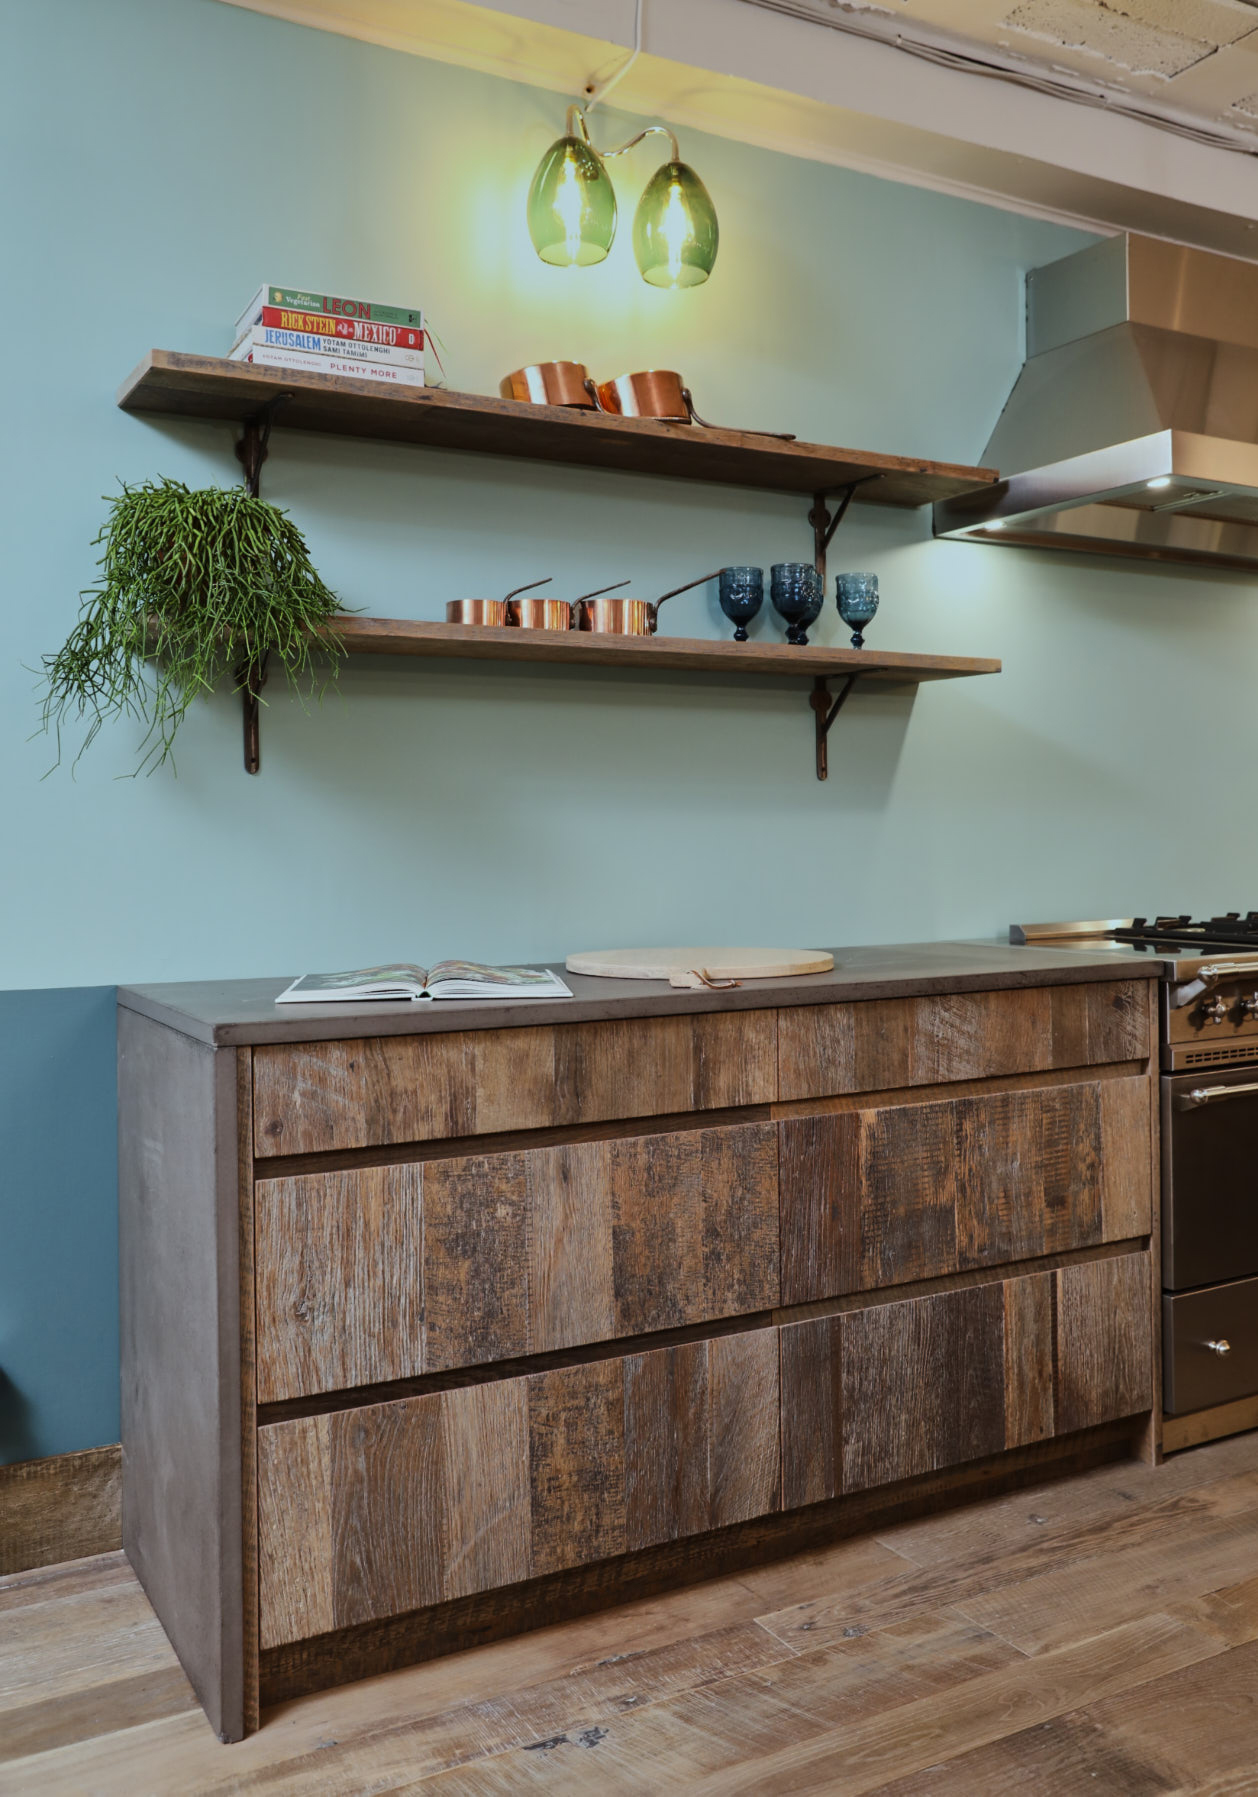 Reclaimed pan drawers with concrete kitchen worktop